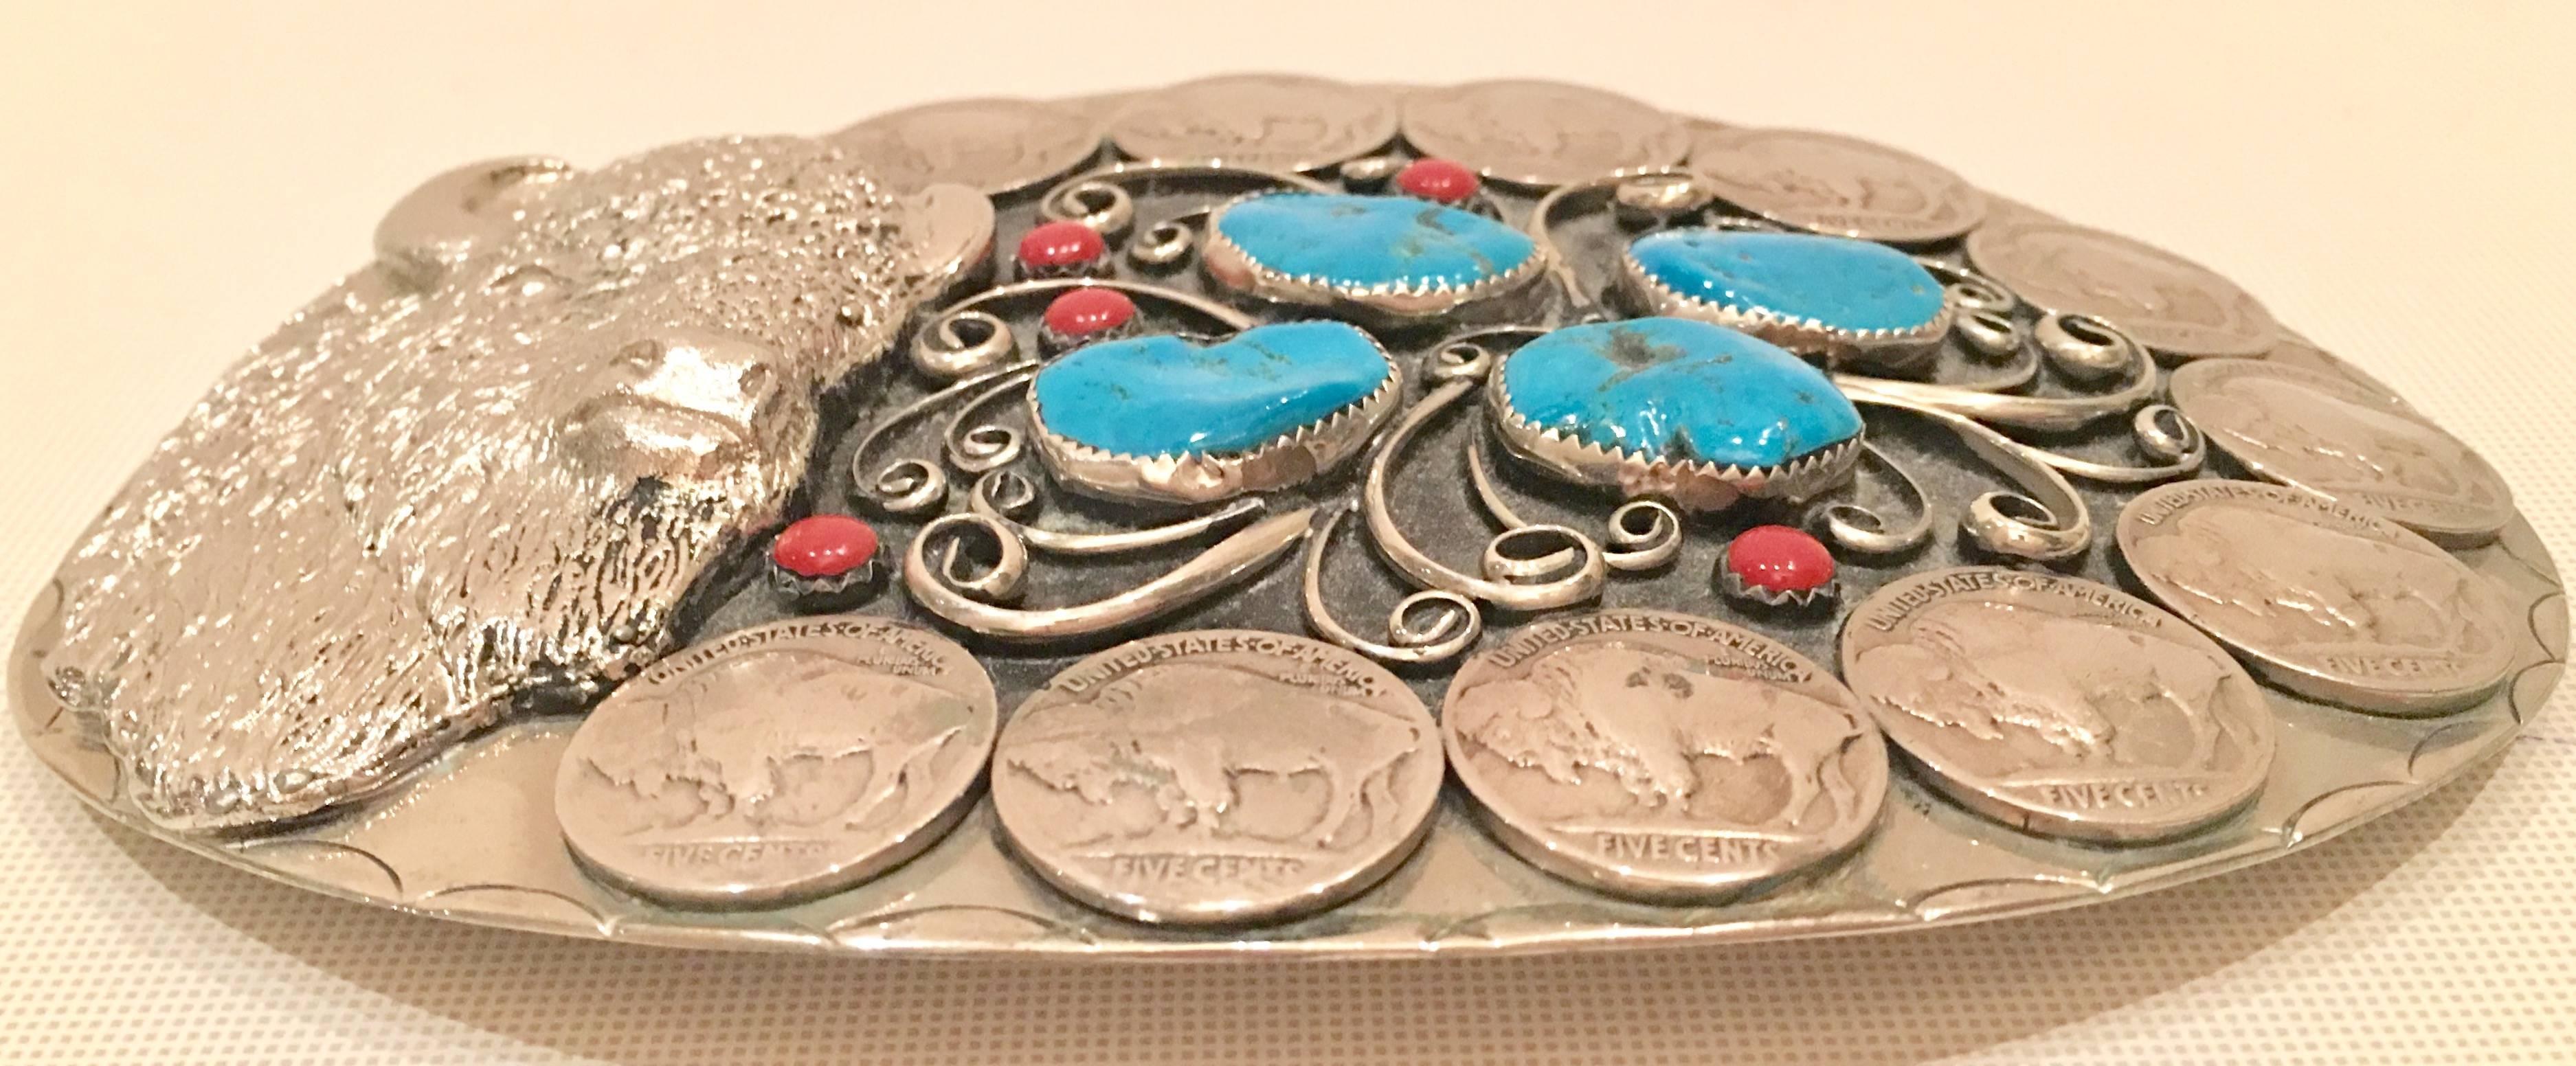 Mid-Century Monumental Buffalo sterling silver and nickel silver belt buckle. This signed squaw wrap belt buckle features four large authentic turquoise stones and five coral stones, surrounded by eleven nickel silver buffalo nickel coins and a